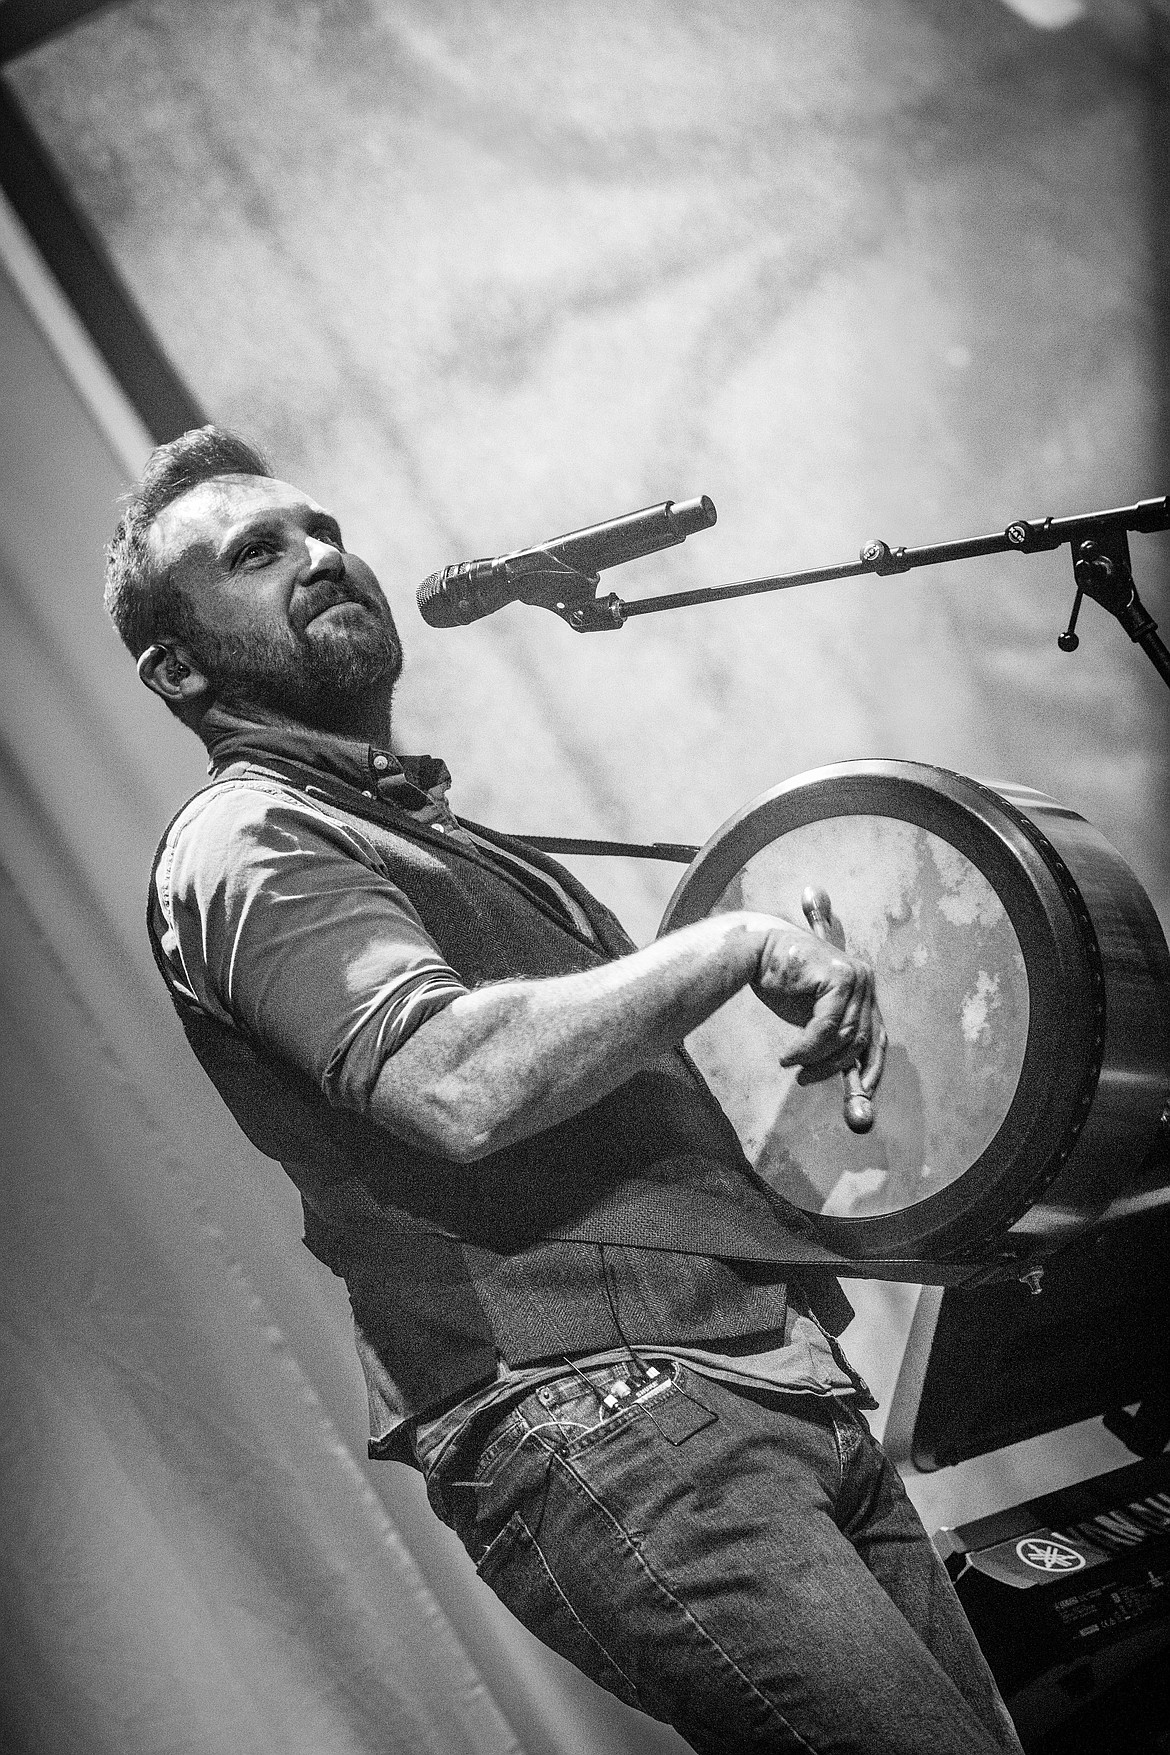 Irish musician David Shannon’s performances are often accompanied by the fiddle and the bodhran, a handheld drum widely used in traditional Irish music.